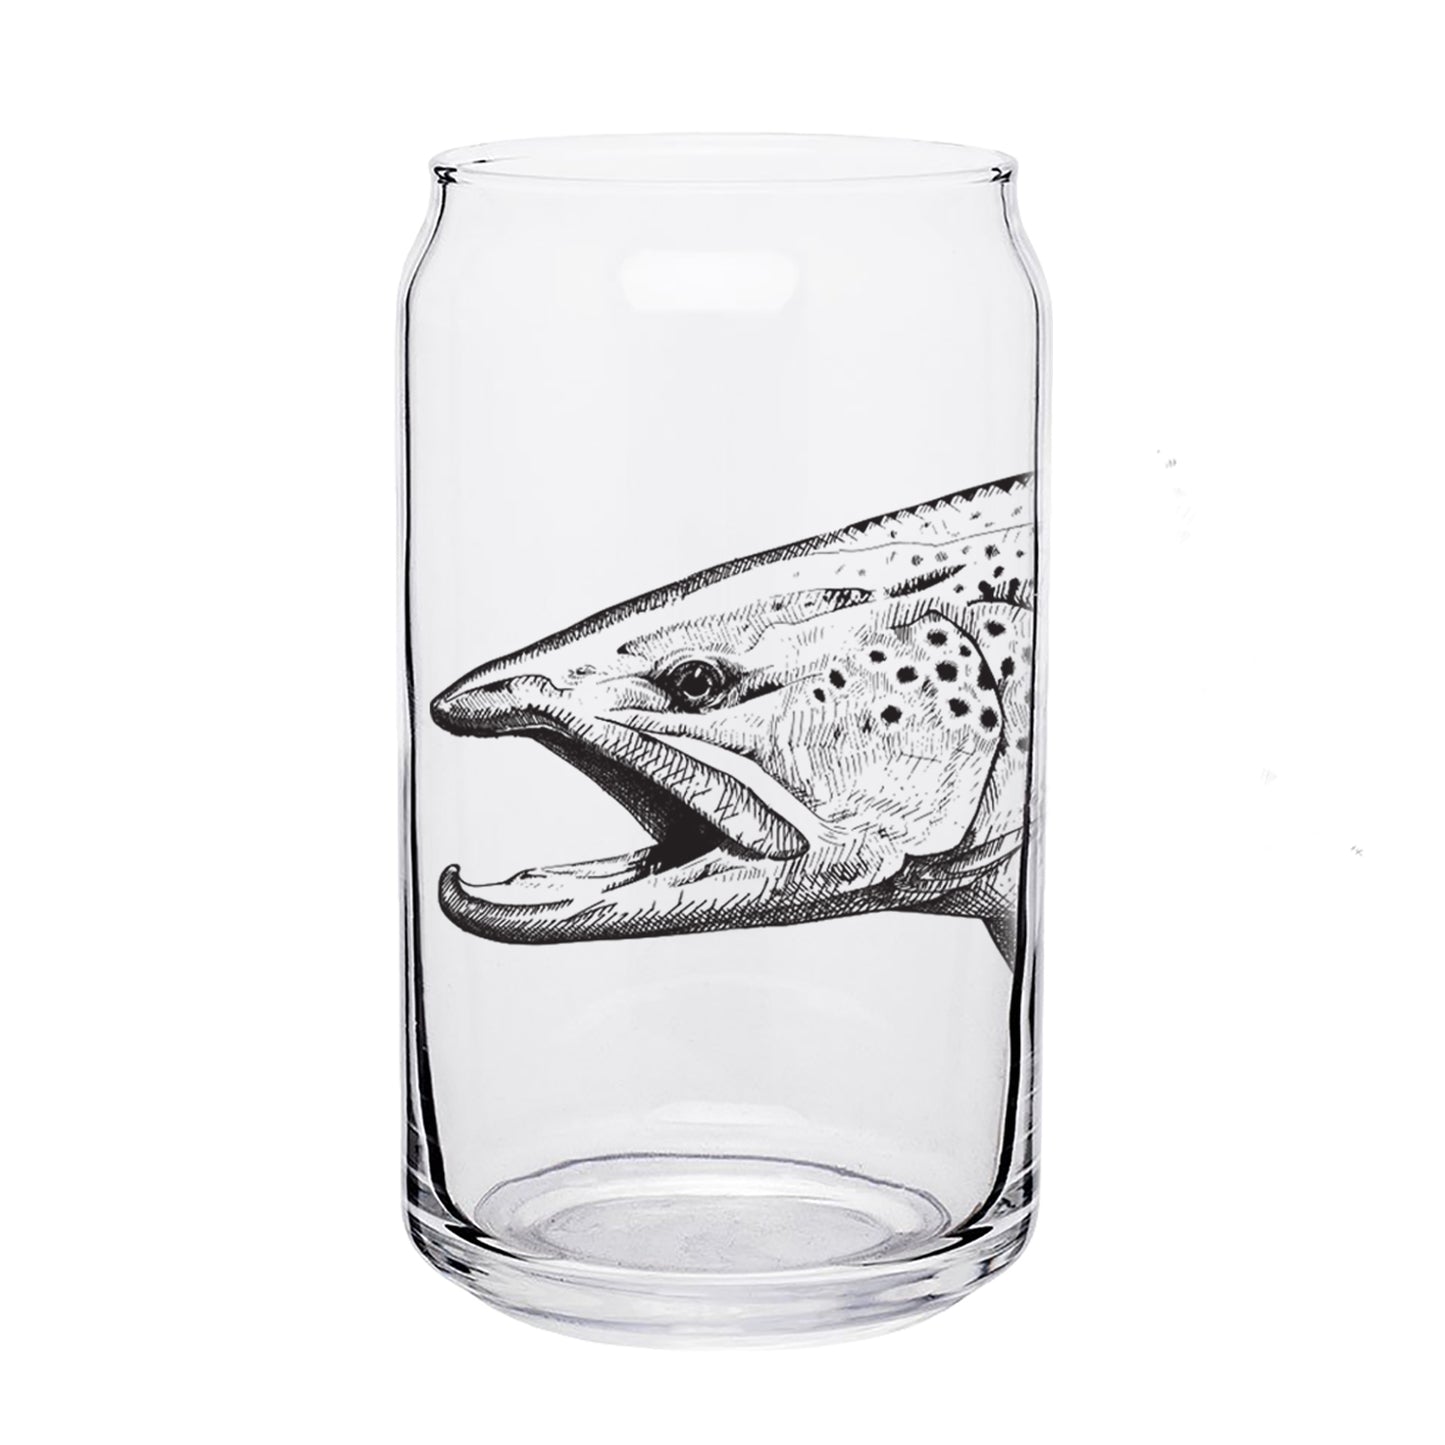 A clear glass shaped as beer can that features trout head design in black ink